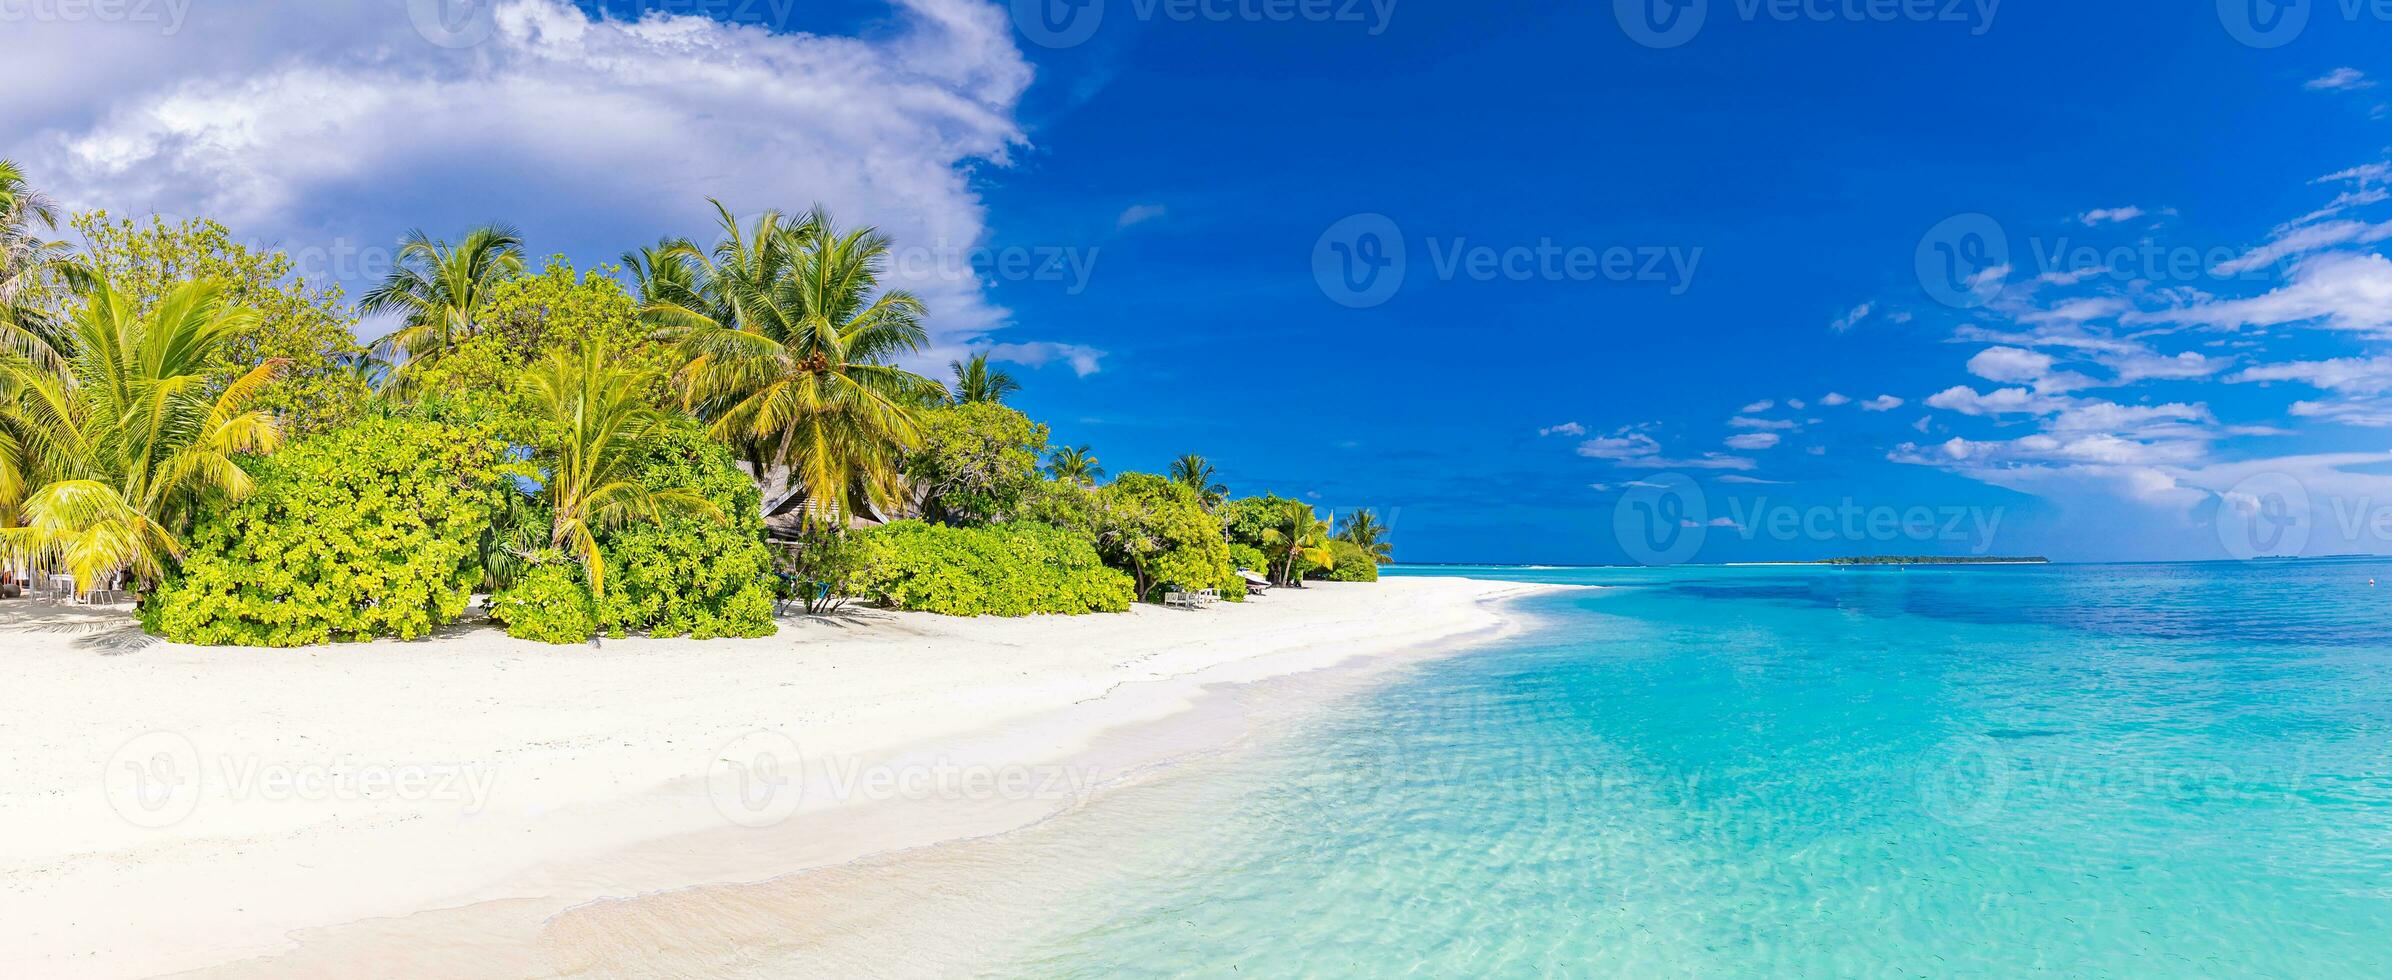 Beautiful tropical beach banner. White sand and coco palms travel tourism wide panorama background concept. Amazing beach landscape. Boost up color process. Luxury island resort vacation or holiday photo